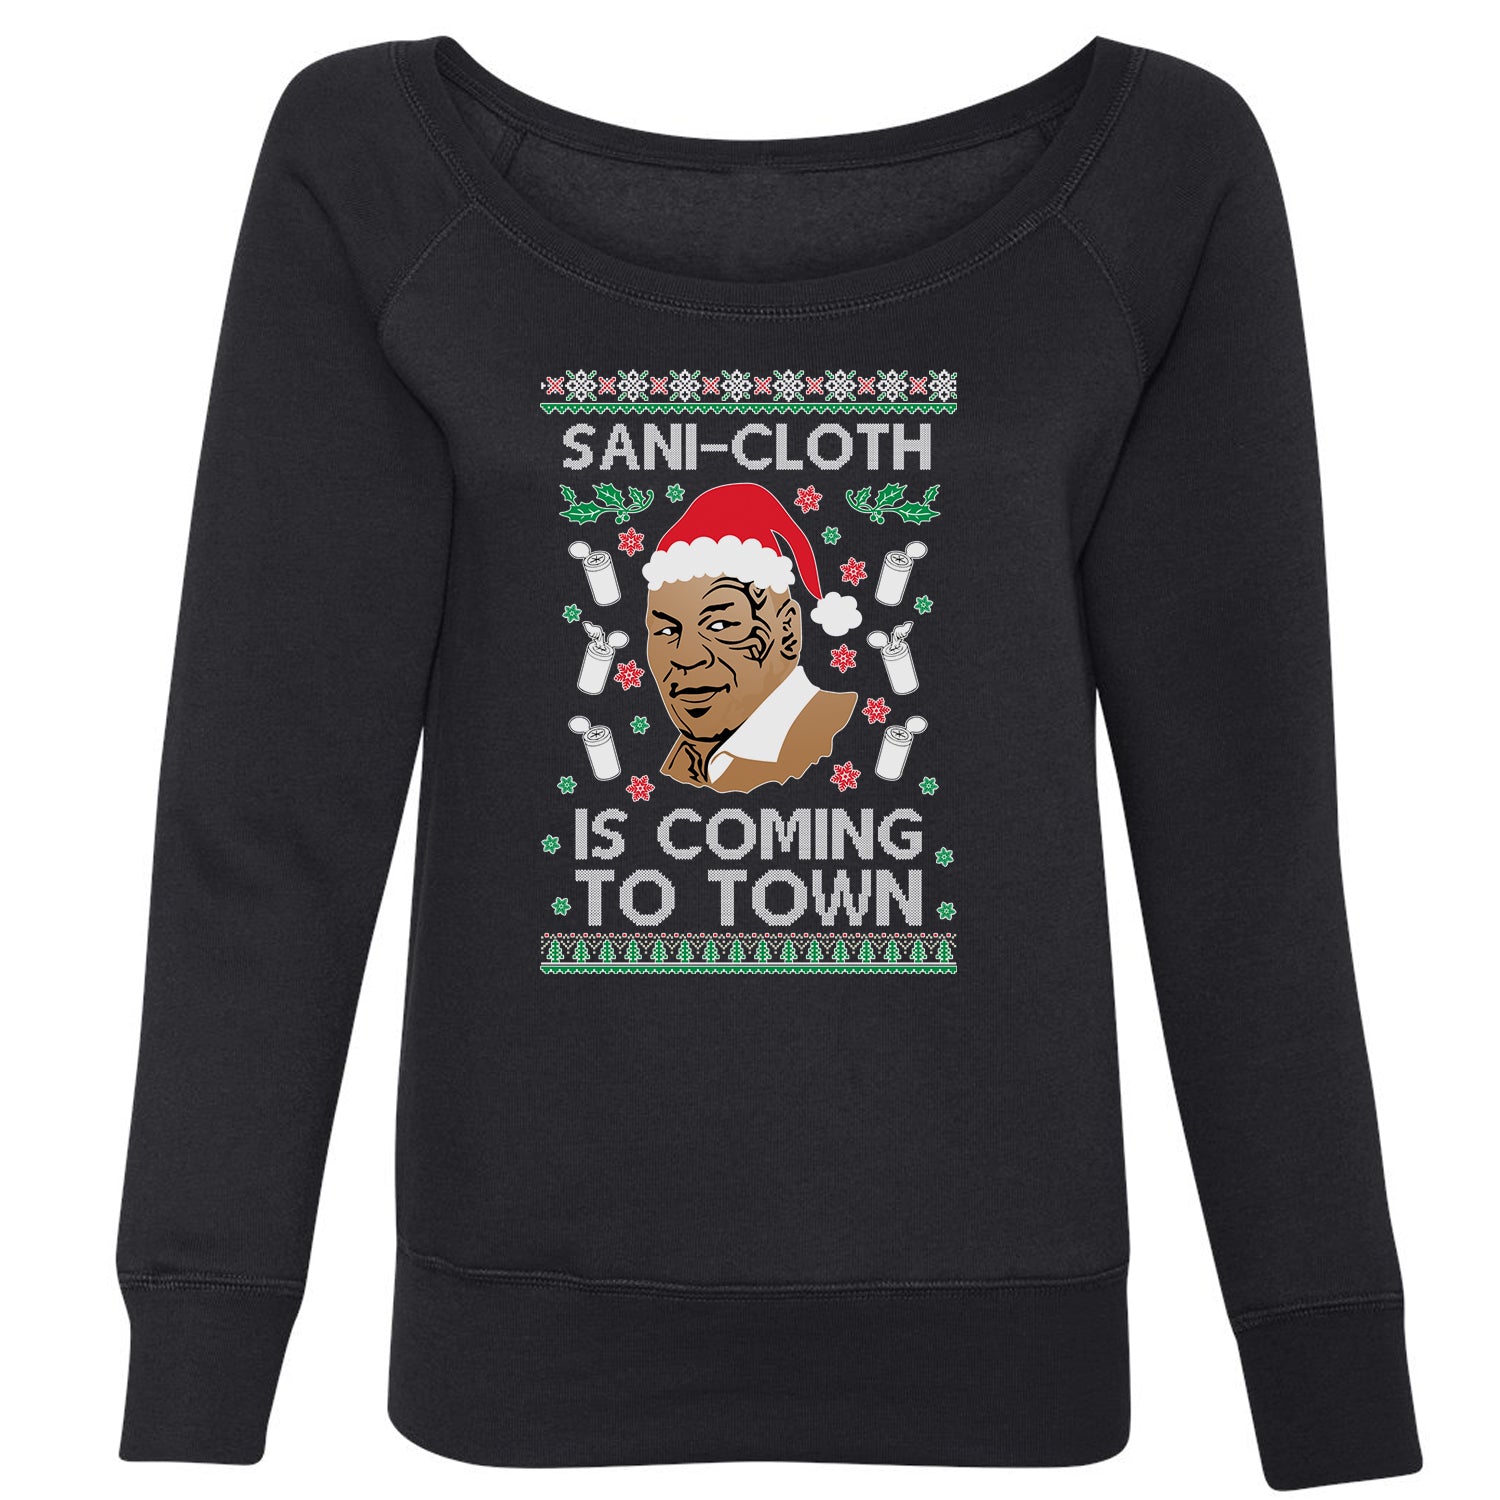 Sani-Cloth Is Coming To Town Ugly Christmas Slouchy Off Shoulder Sweatshirt 2021, mike, miketyson, tyson by Expression Tees